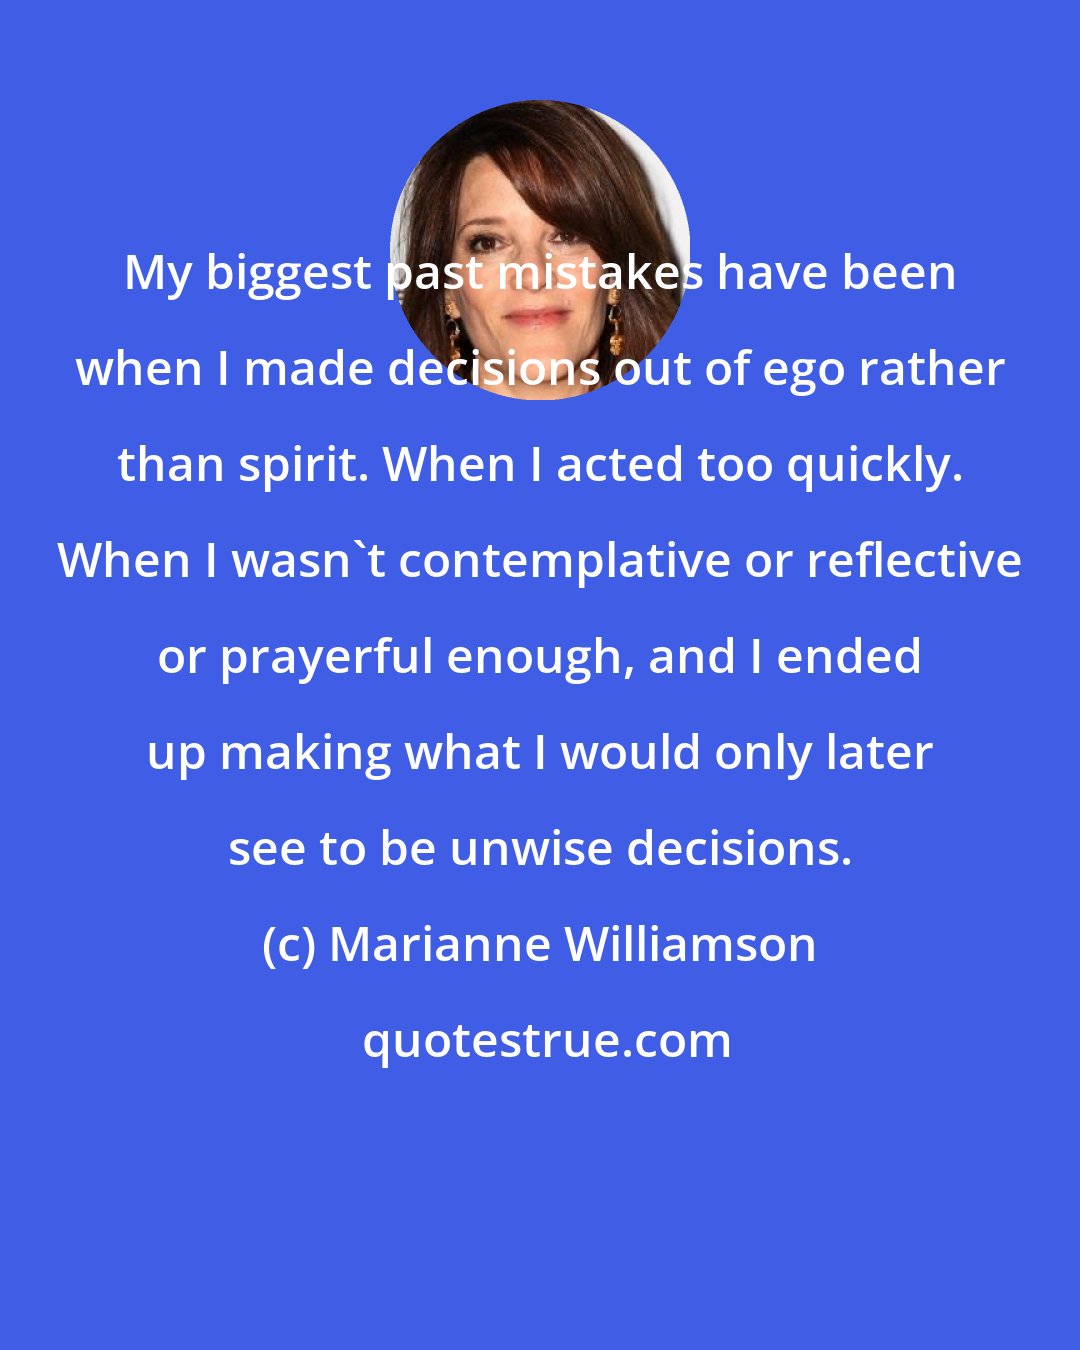 Marianne Williamson: My biggest past mistakes have been when I made decisions out of ego rather than spirit. When I acted too quickly. When I wasn't contemplative or reflective or prayerful enough, and I ended up making what I would only later see to be unwise decisions.